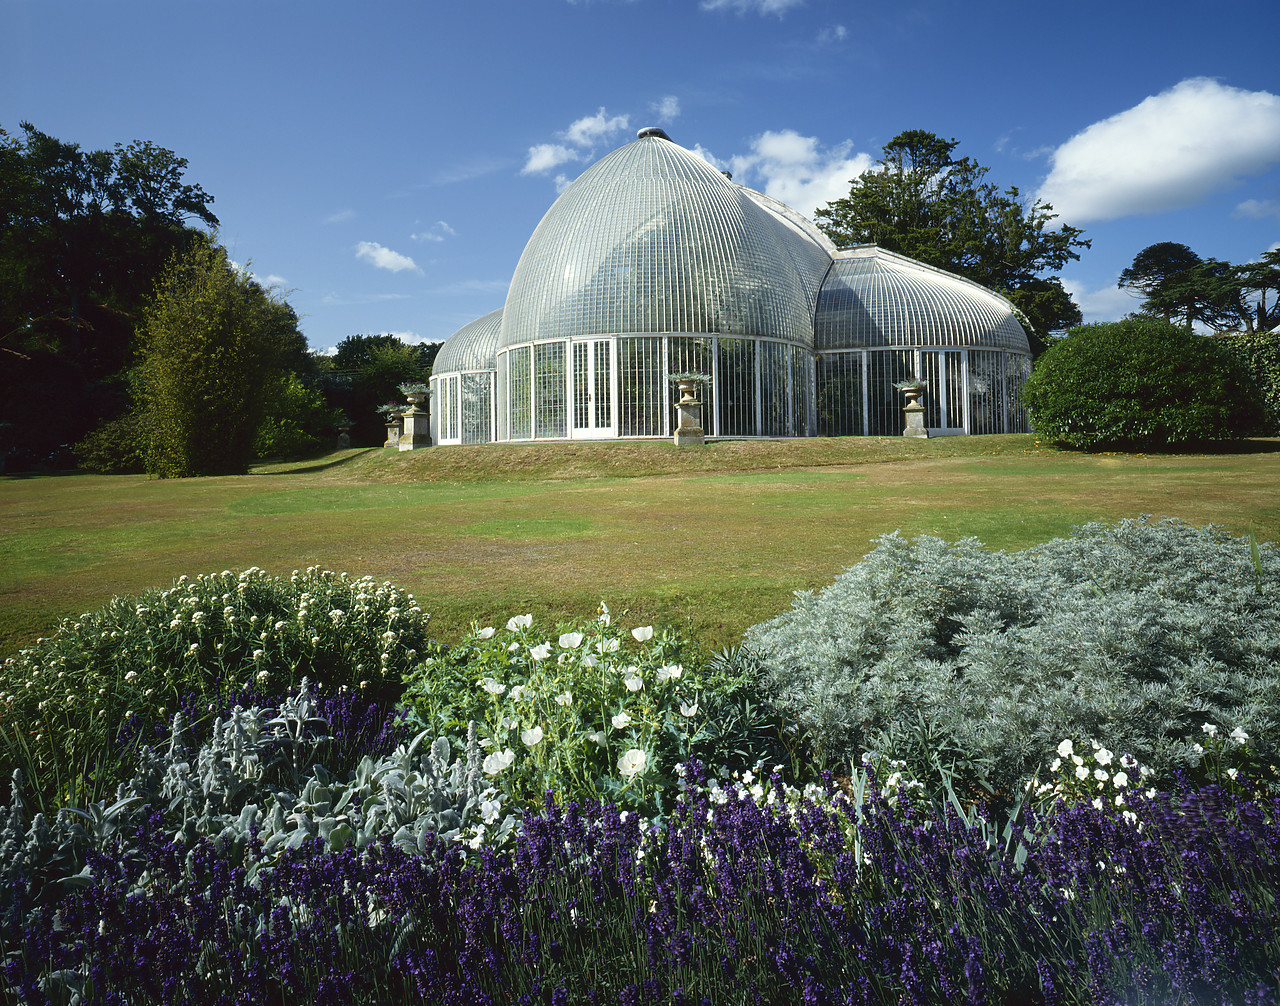 #924073-1 - The Palm House, Bicton Park Gardens, East Budleigh, Devon, England